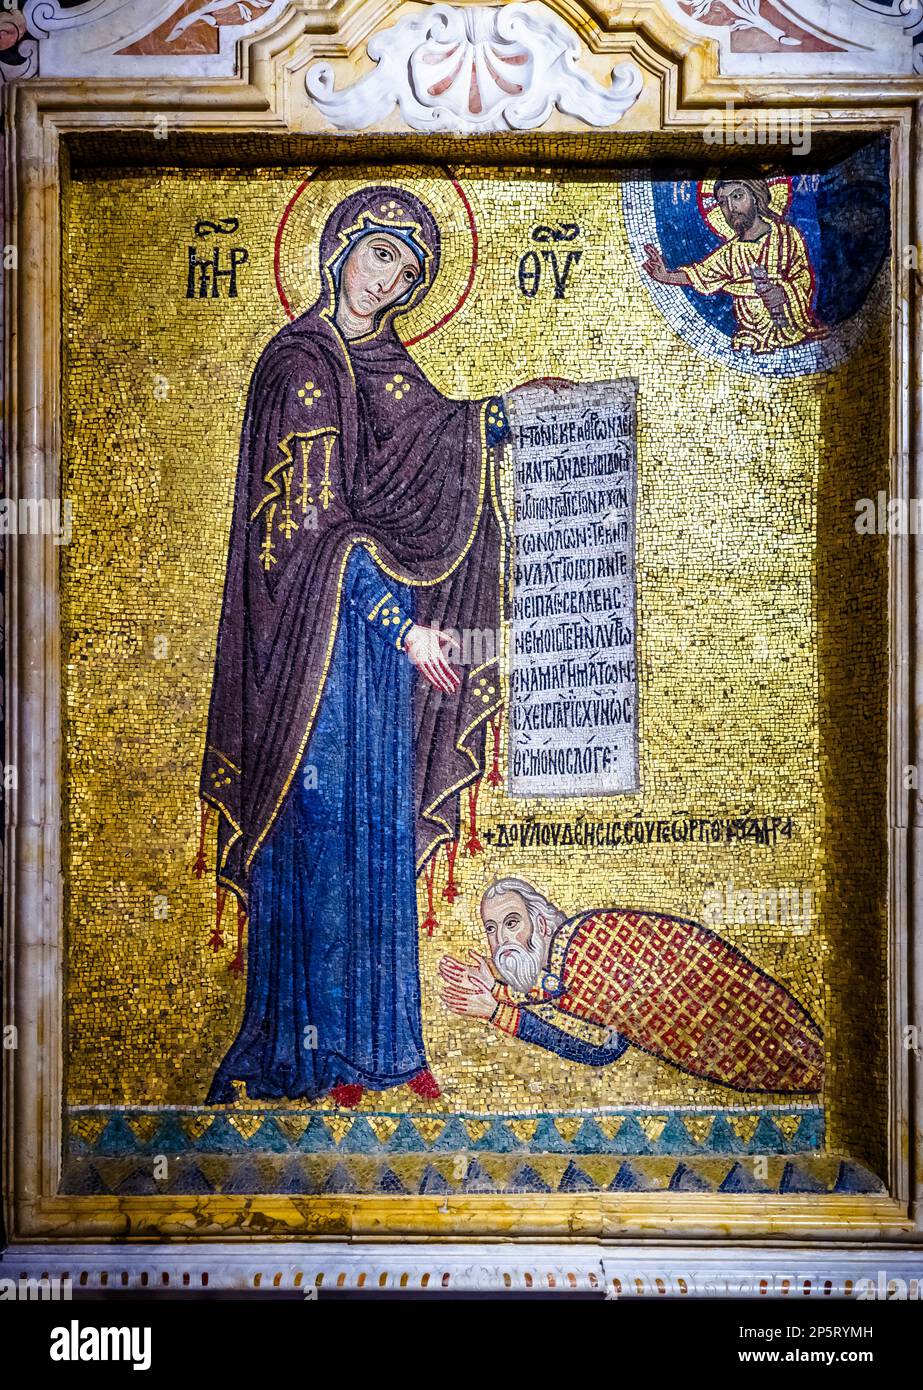 12th century Byzantine mosaic depicting George of Antioch at the feet of Virgin Mary - Church of Santa Maria dell'Ammiraglio - Palermo, Sicily, Italy Stock Photo